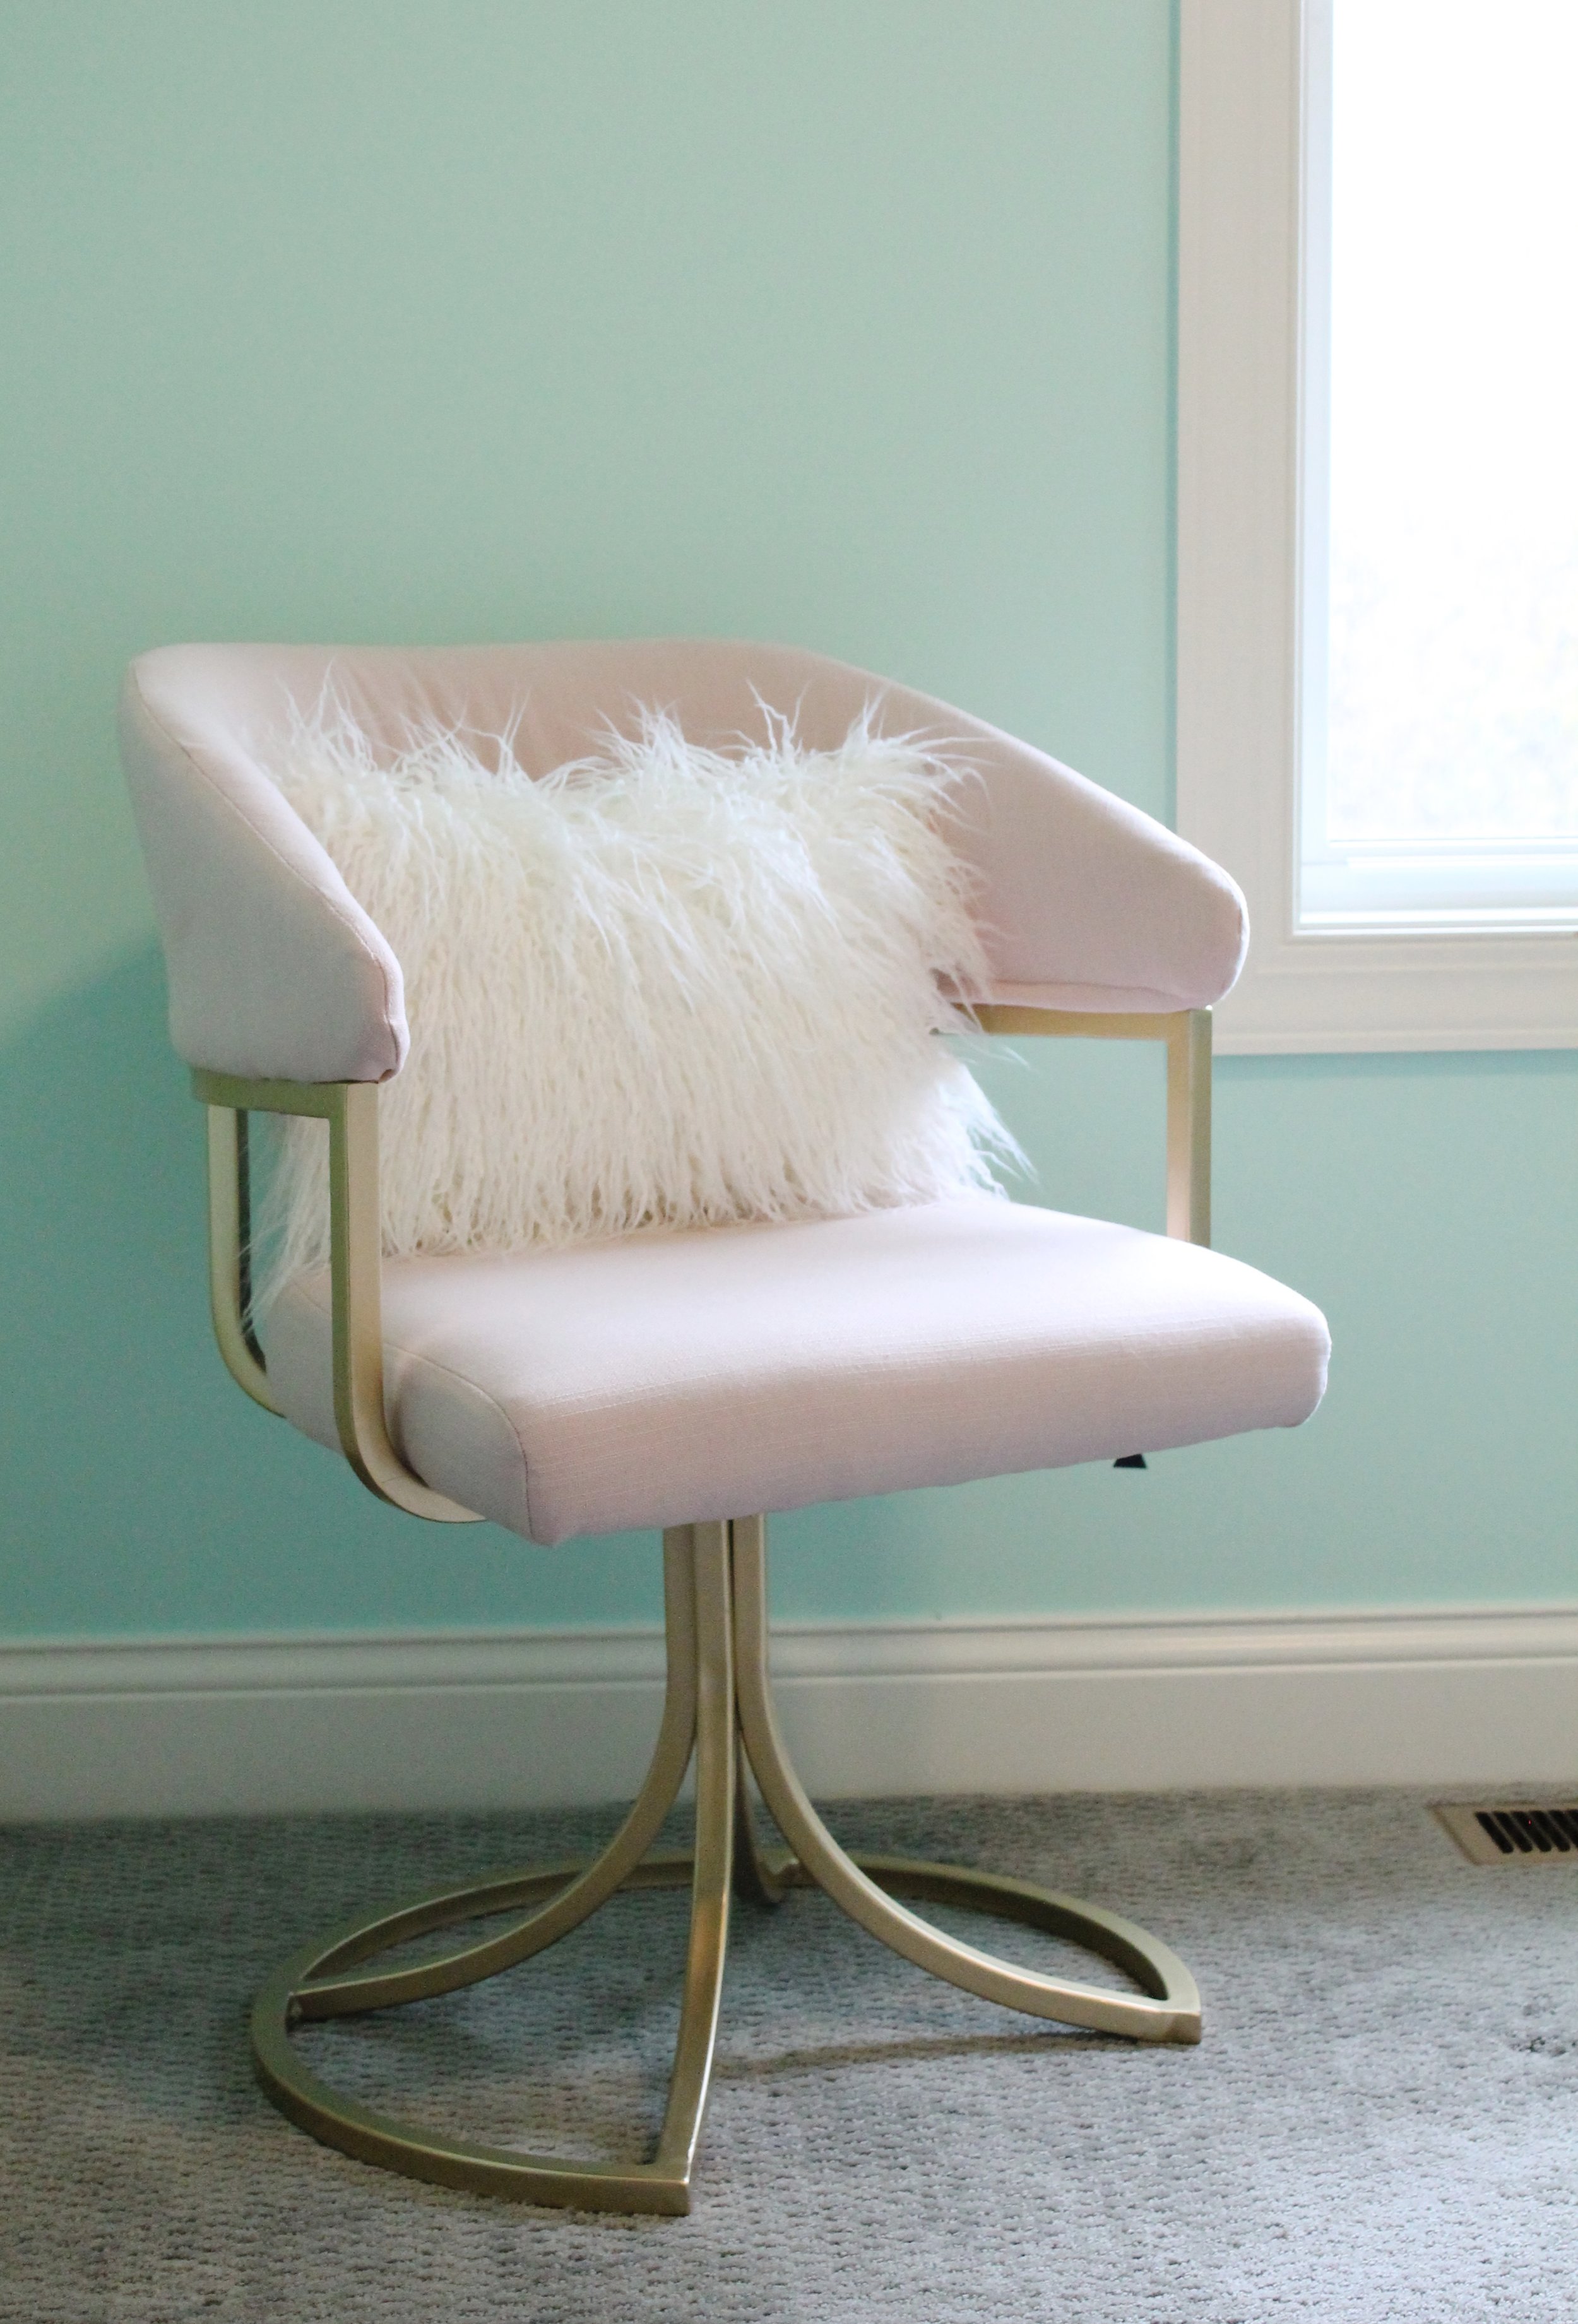 Pink and Gold Chair with mint walls.